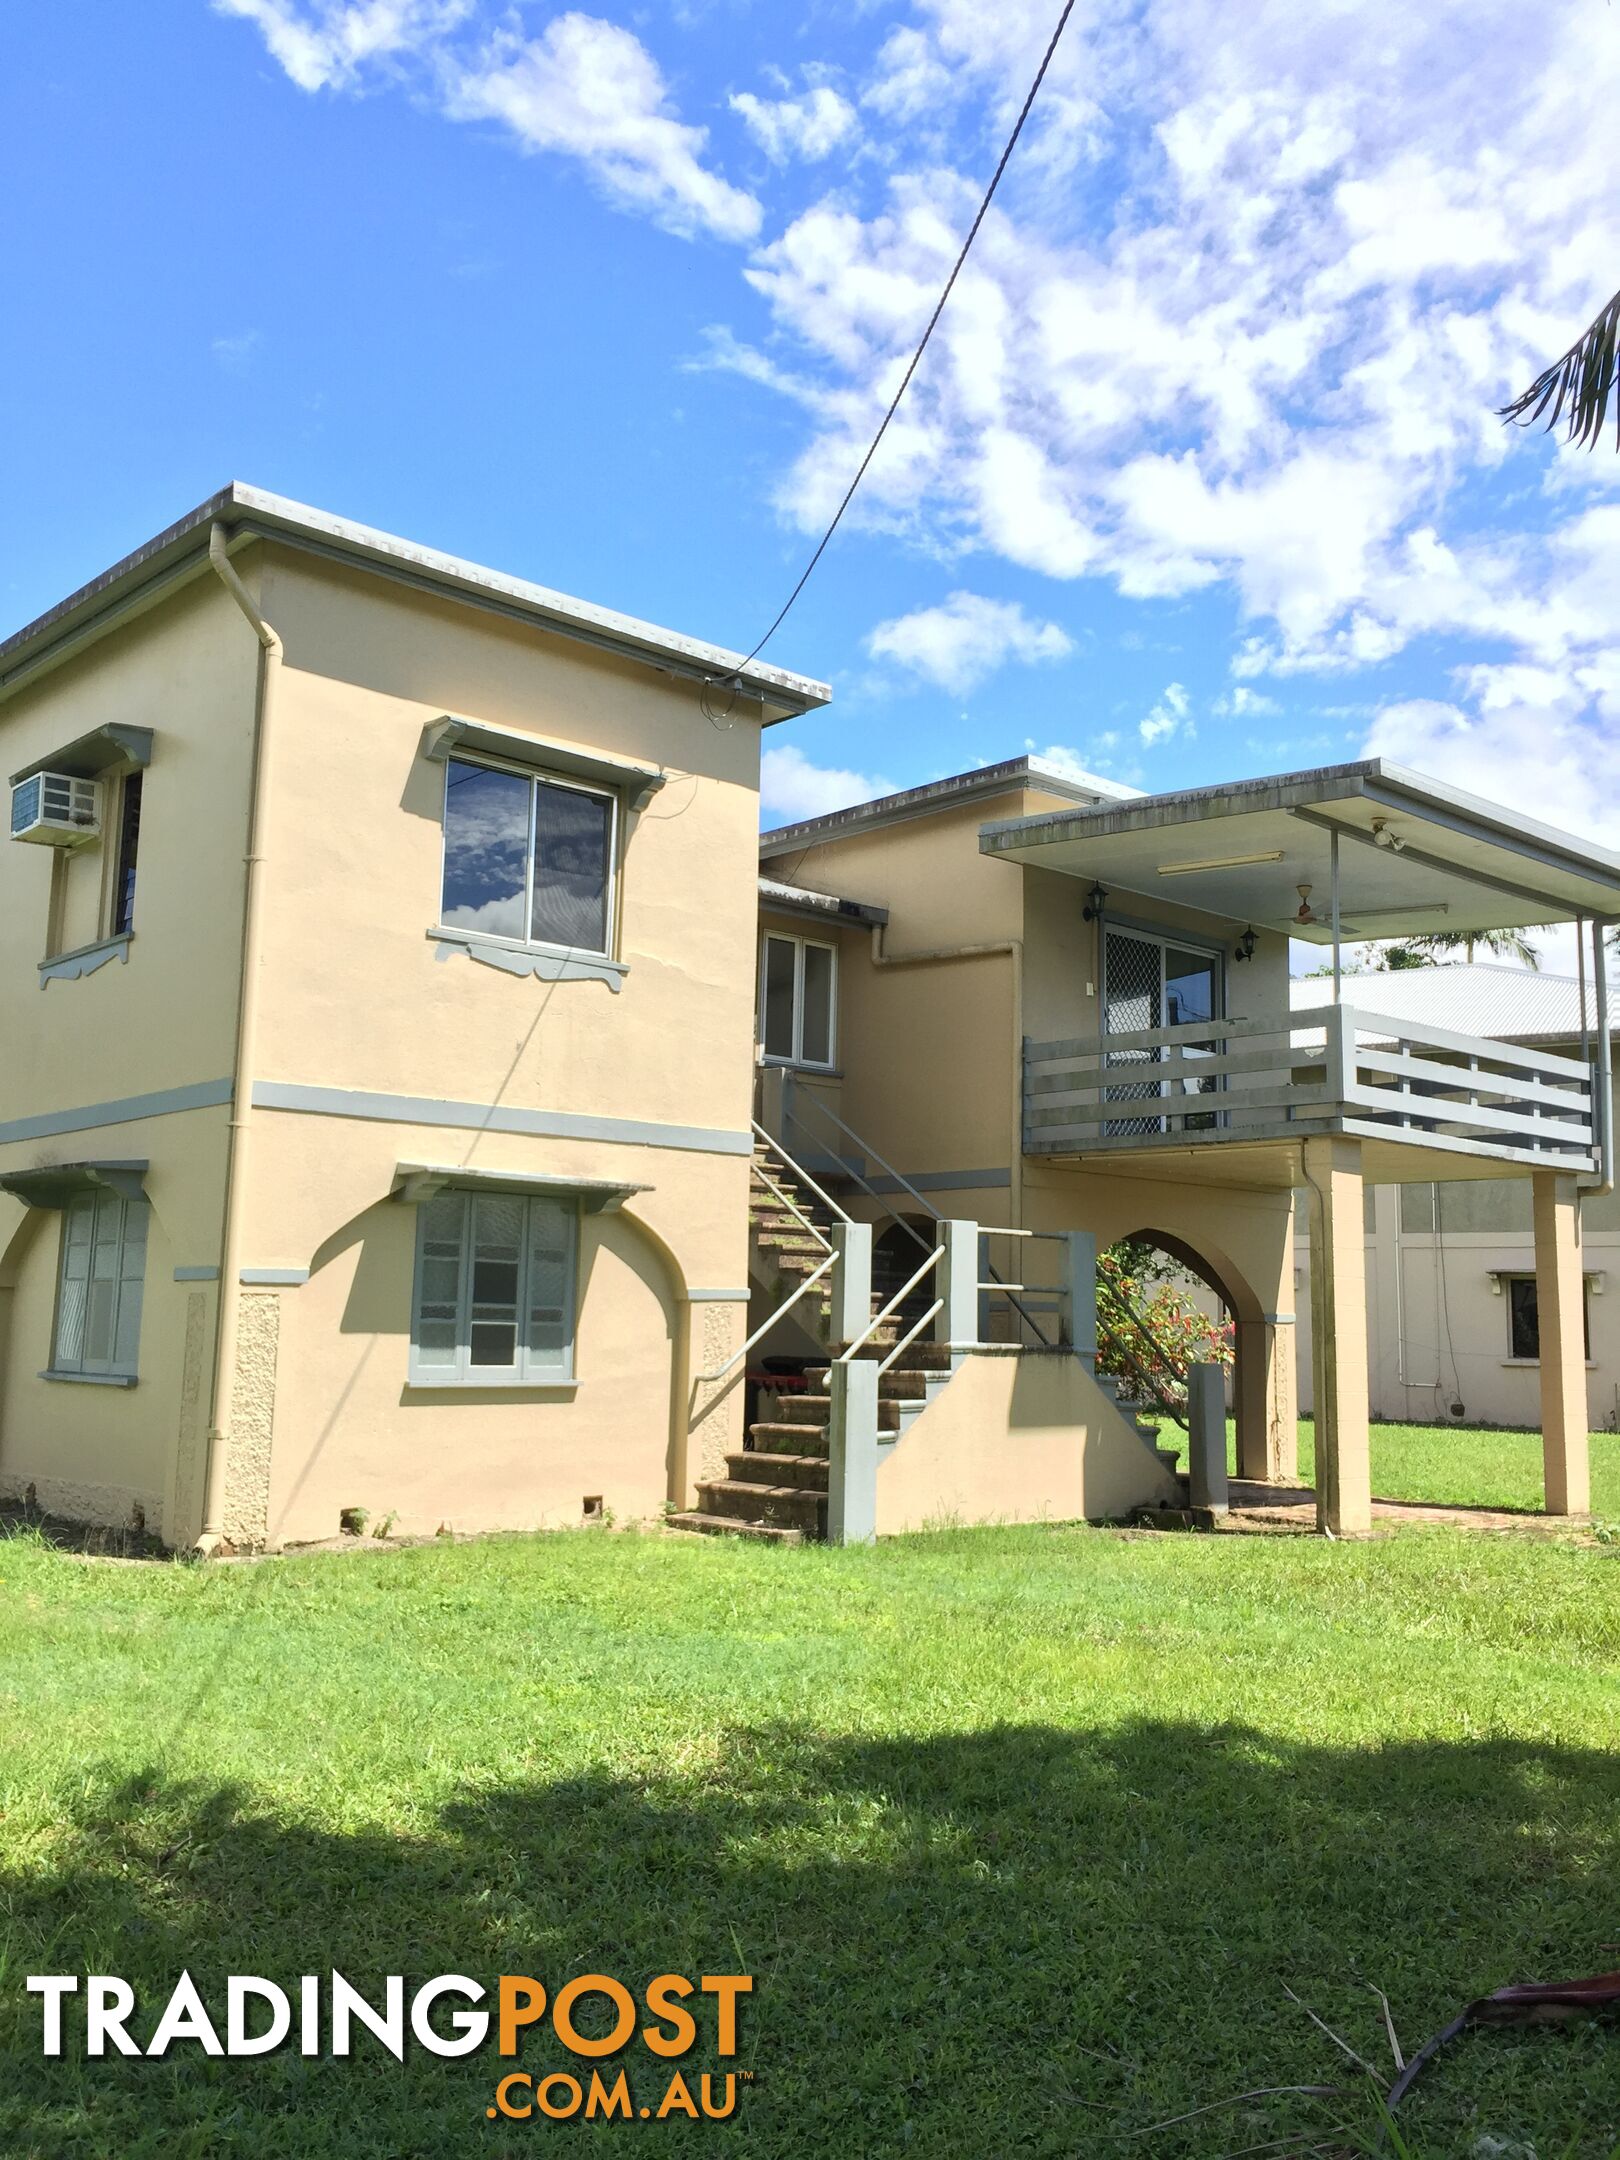 95 Bryant St Tully QLD 4854